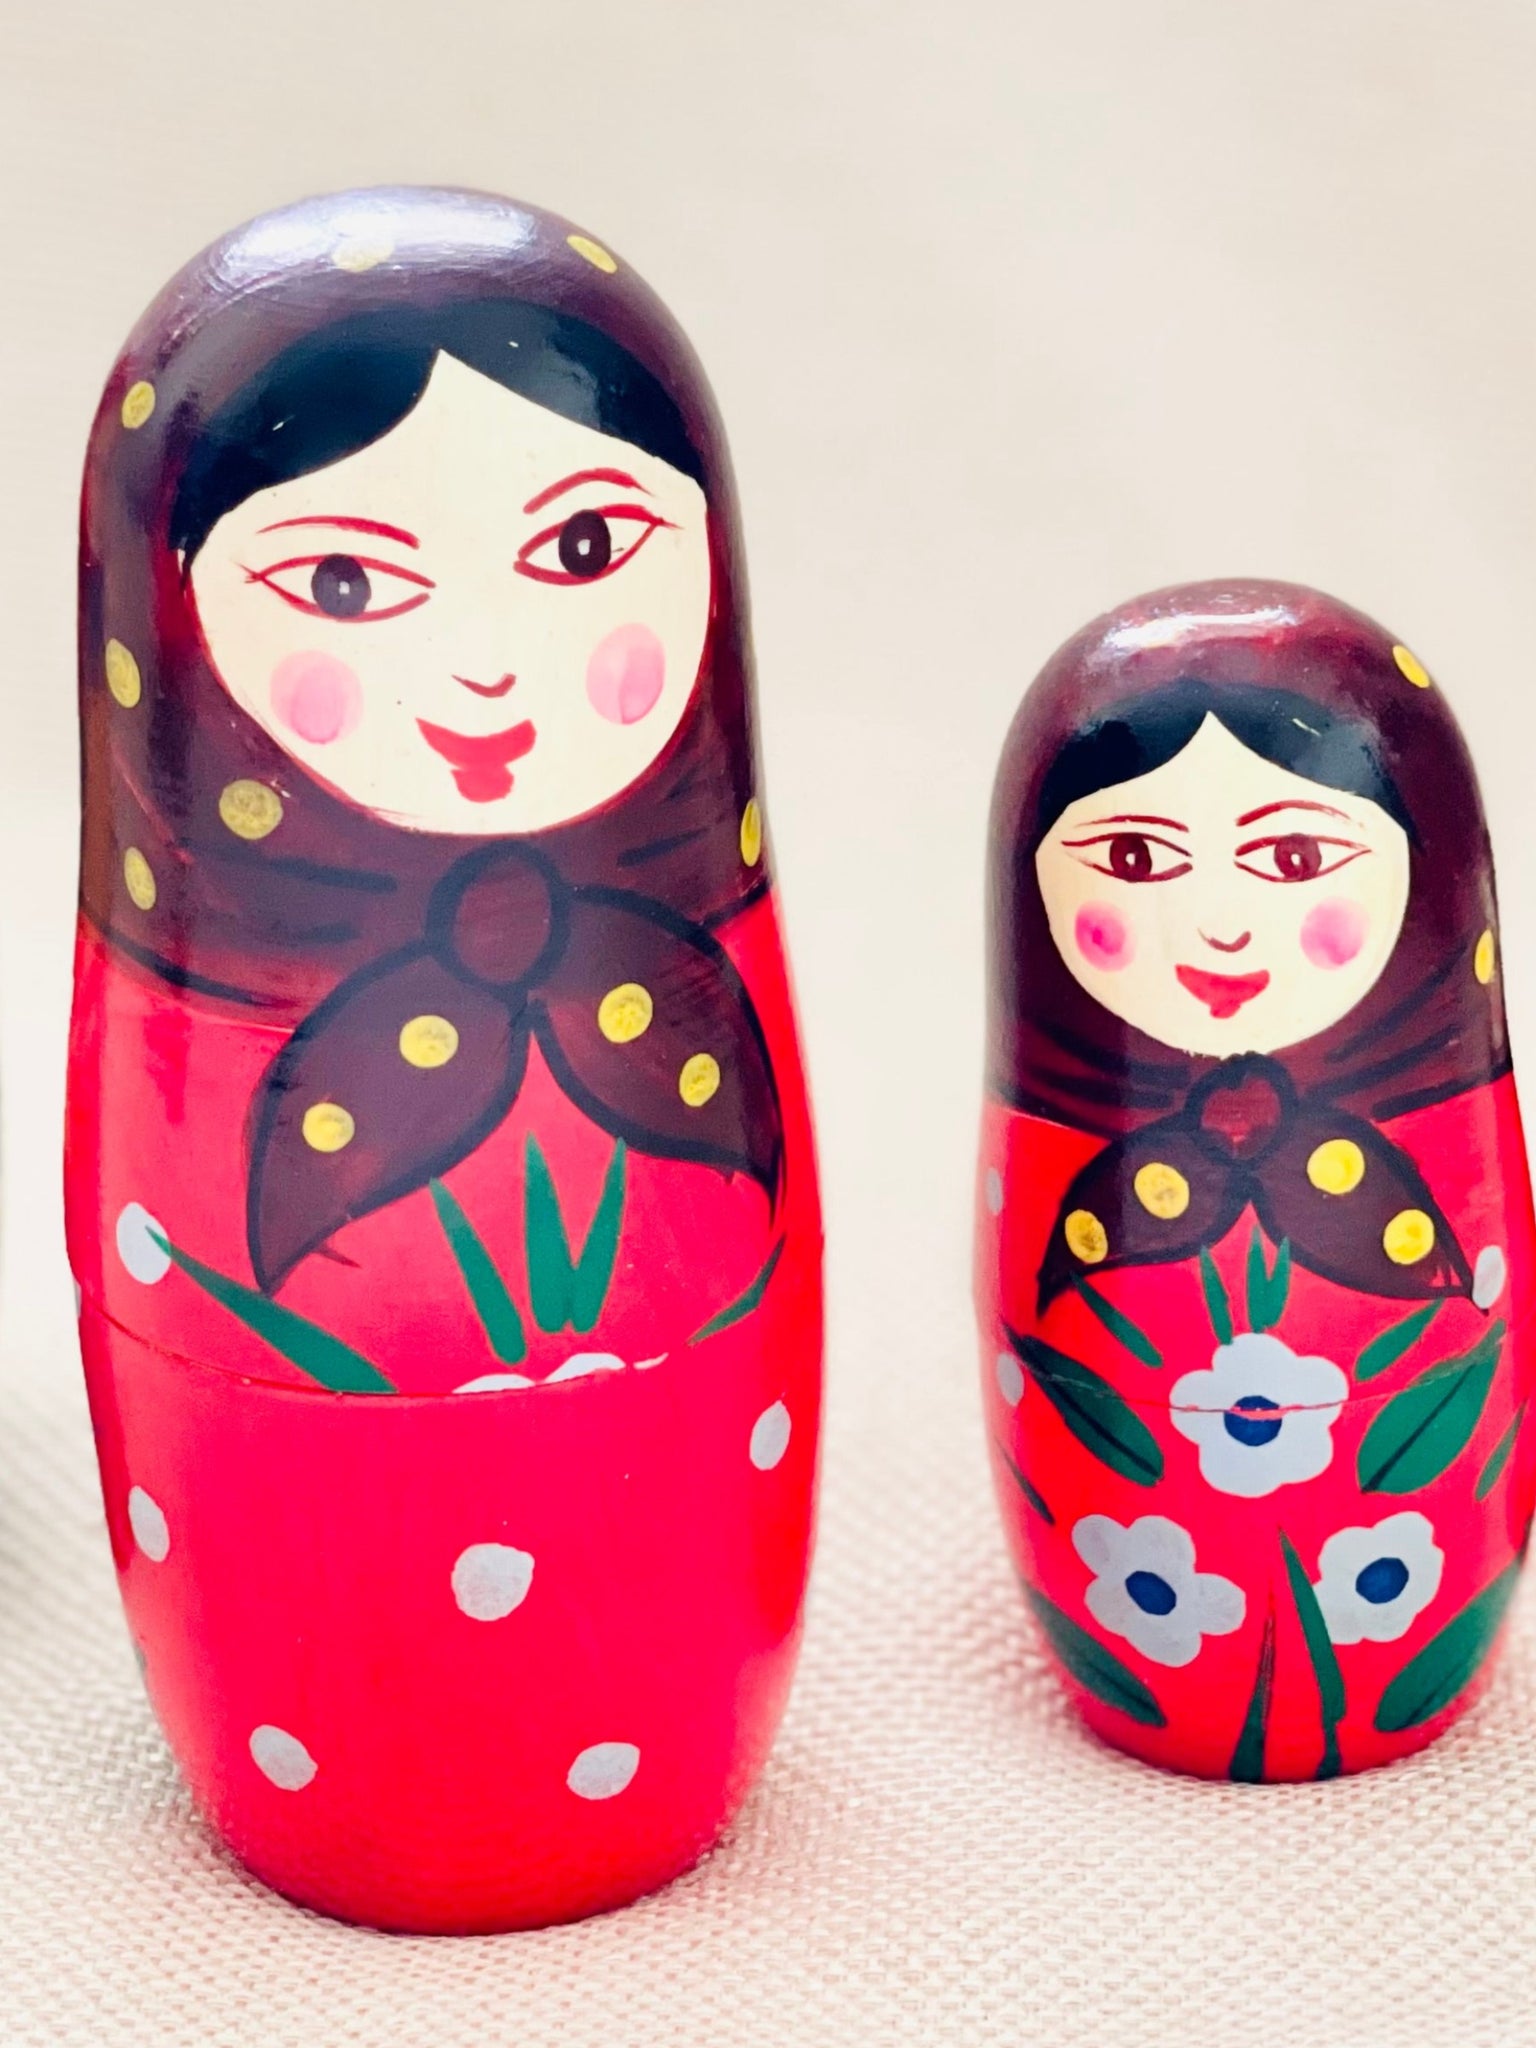 Wooden Nesting Russian Doll